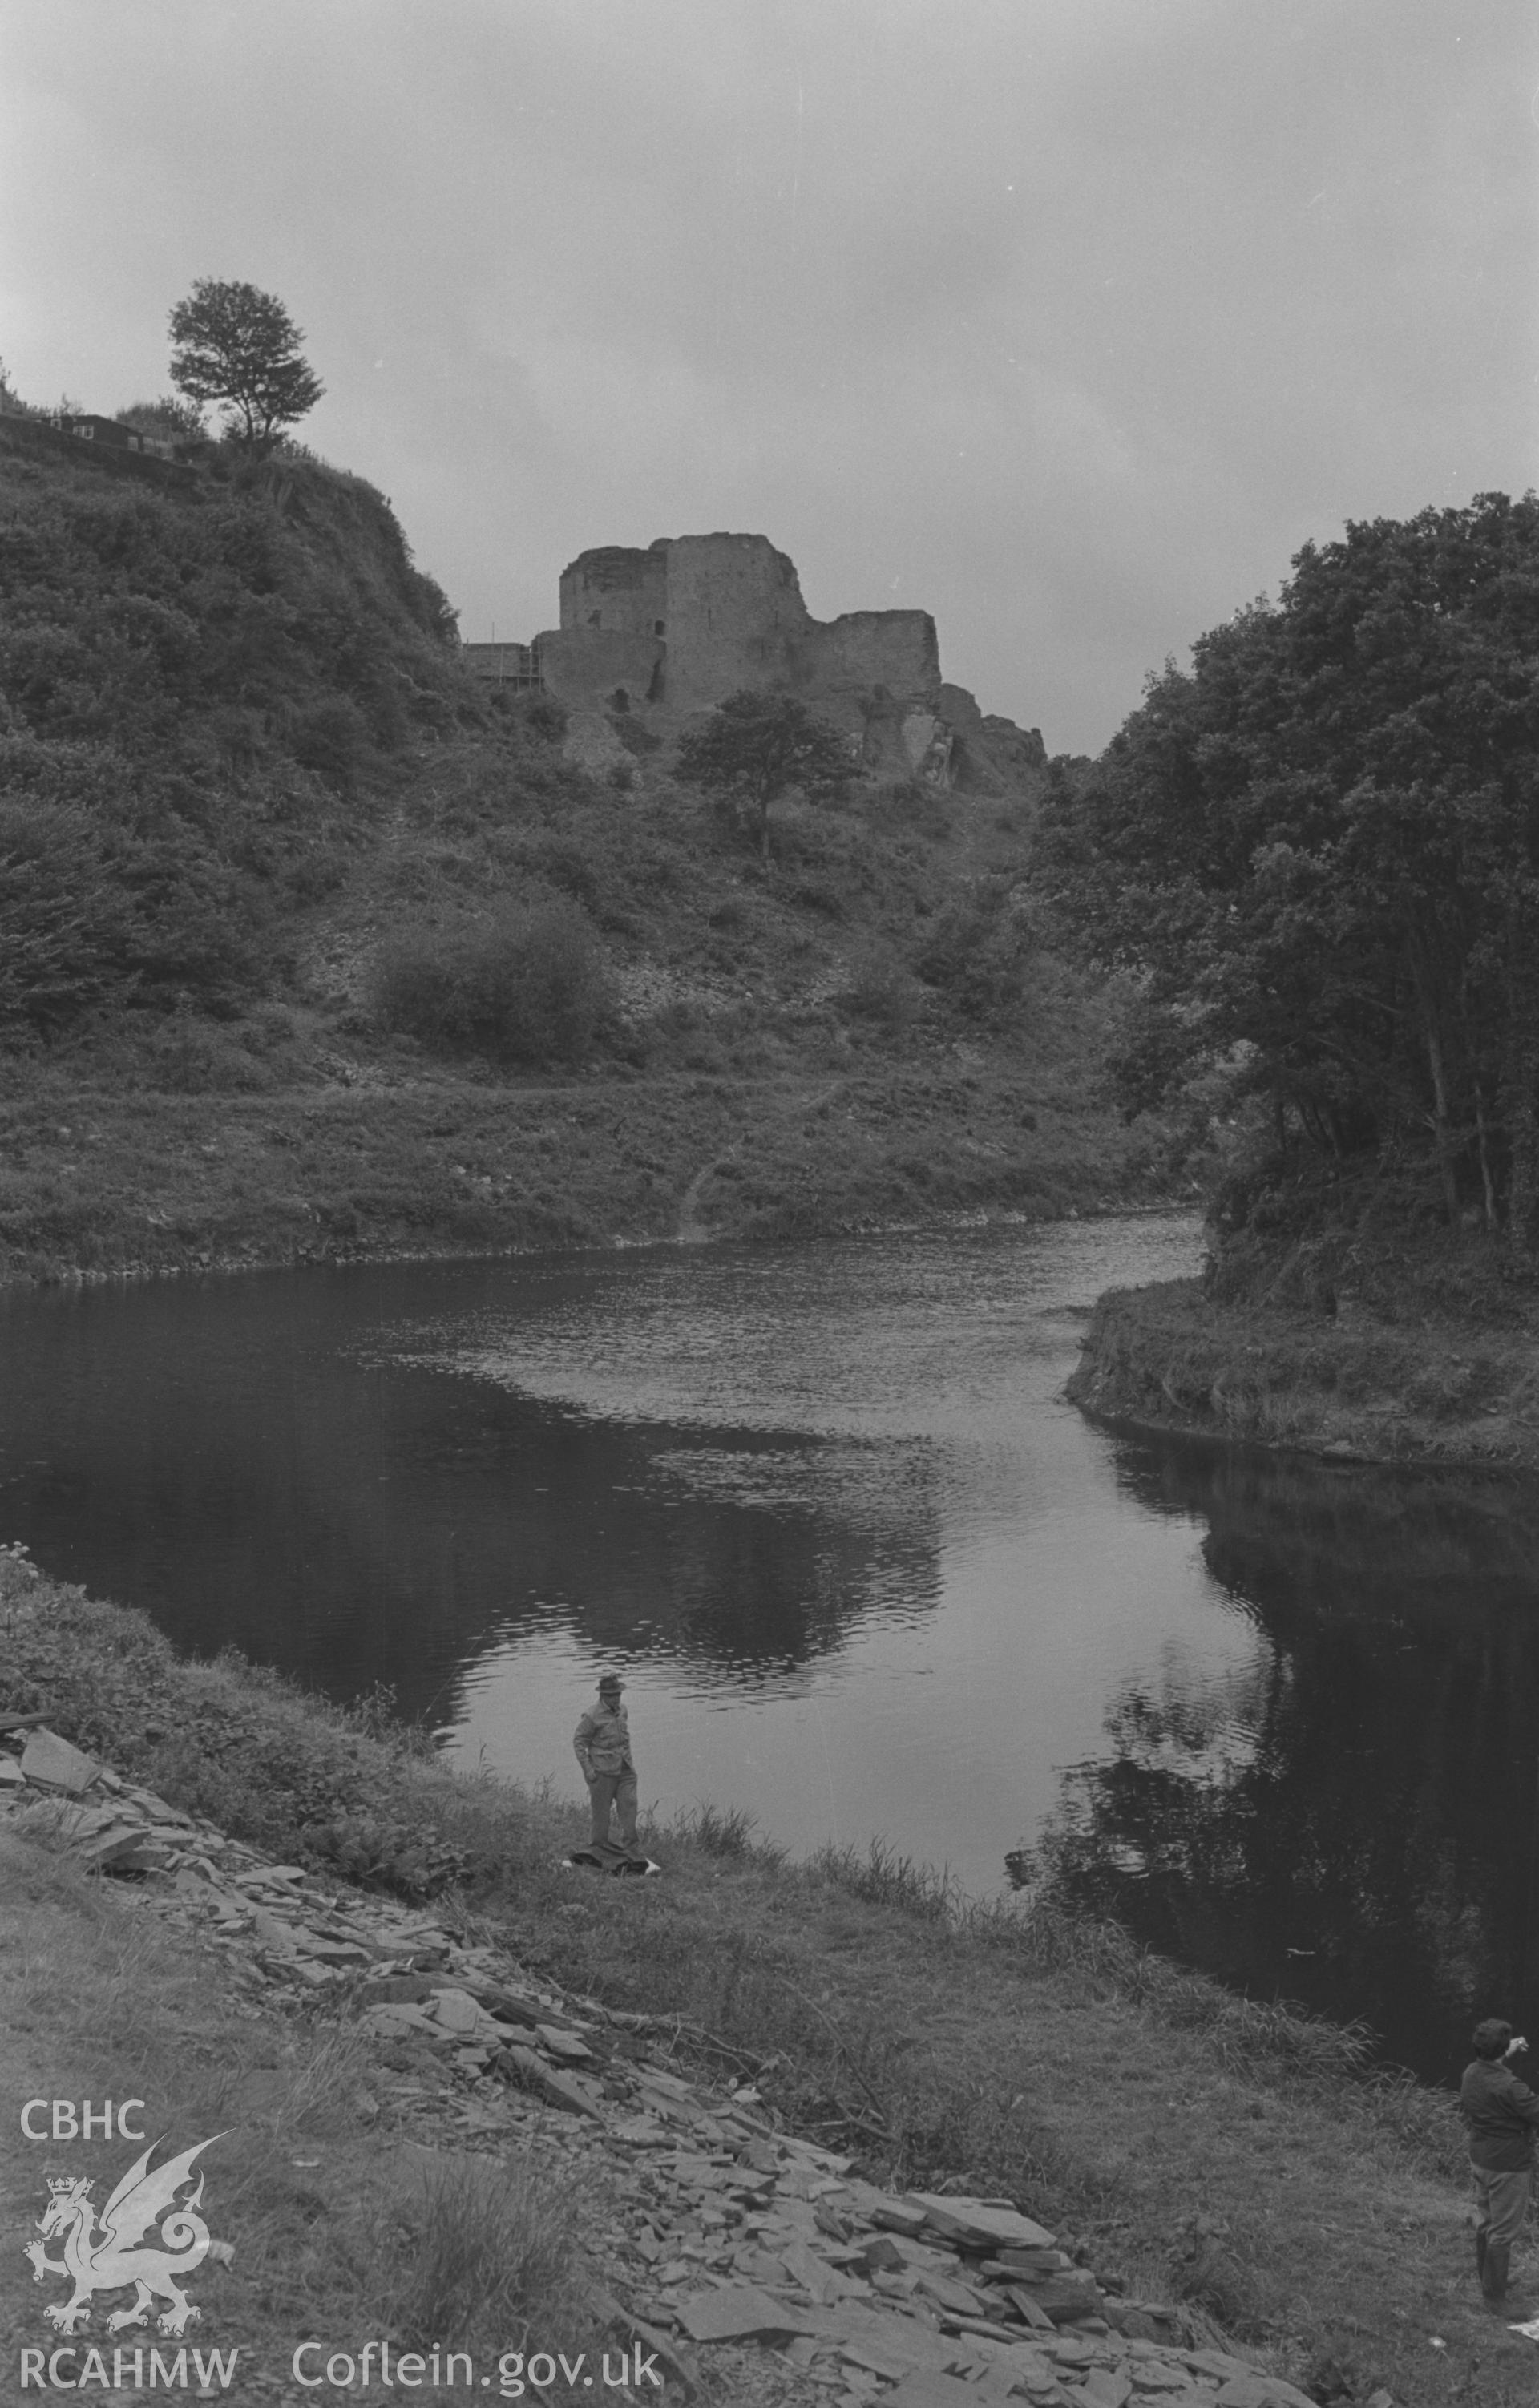 Digital copy of a black and white negative showing Cilgerran castle overlooking the Teifi. Photographed in September 1963 by Arthur O. Chater from Grid Reference SN 1980 4296, looking west north west.